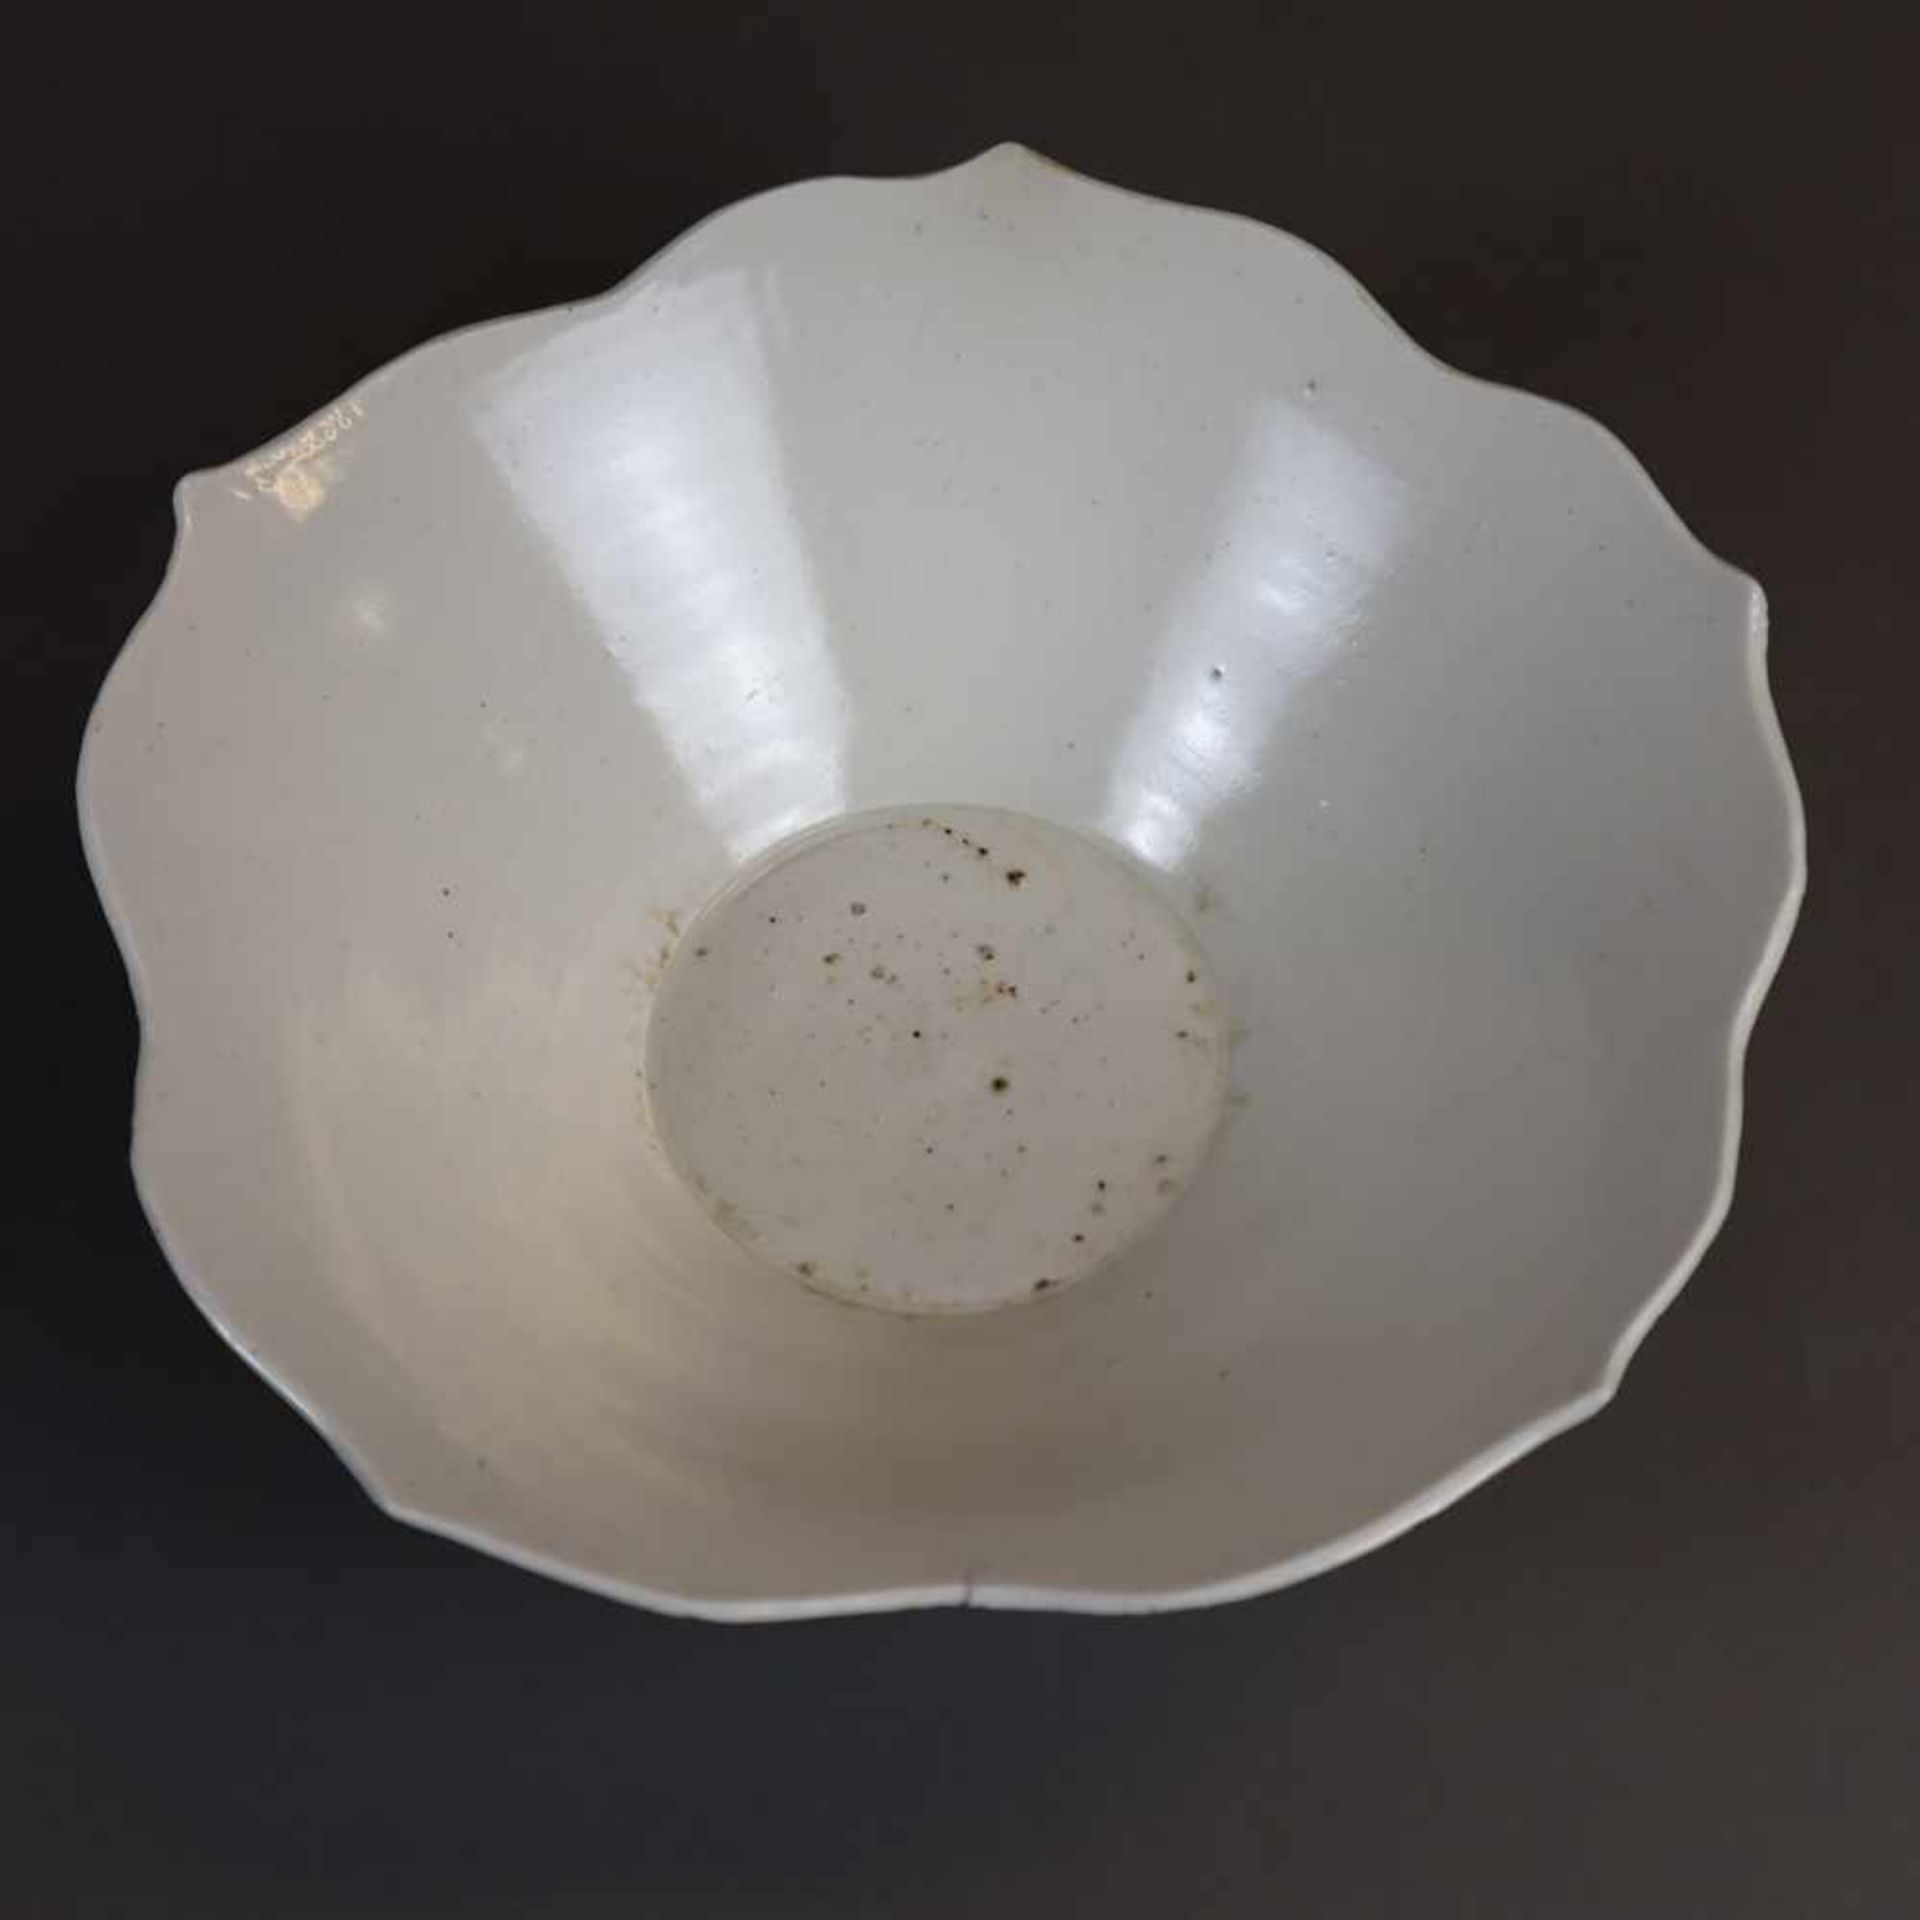 A Dingyao Flower-Shaped Bowl - China, Liao-Dynastie, off white glaze, appr.25 cm diam., age and use遼